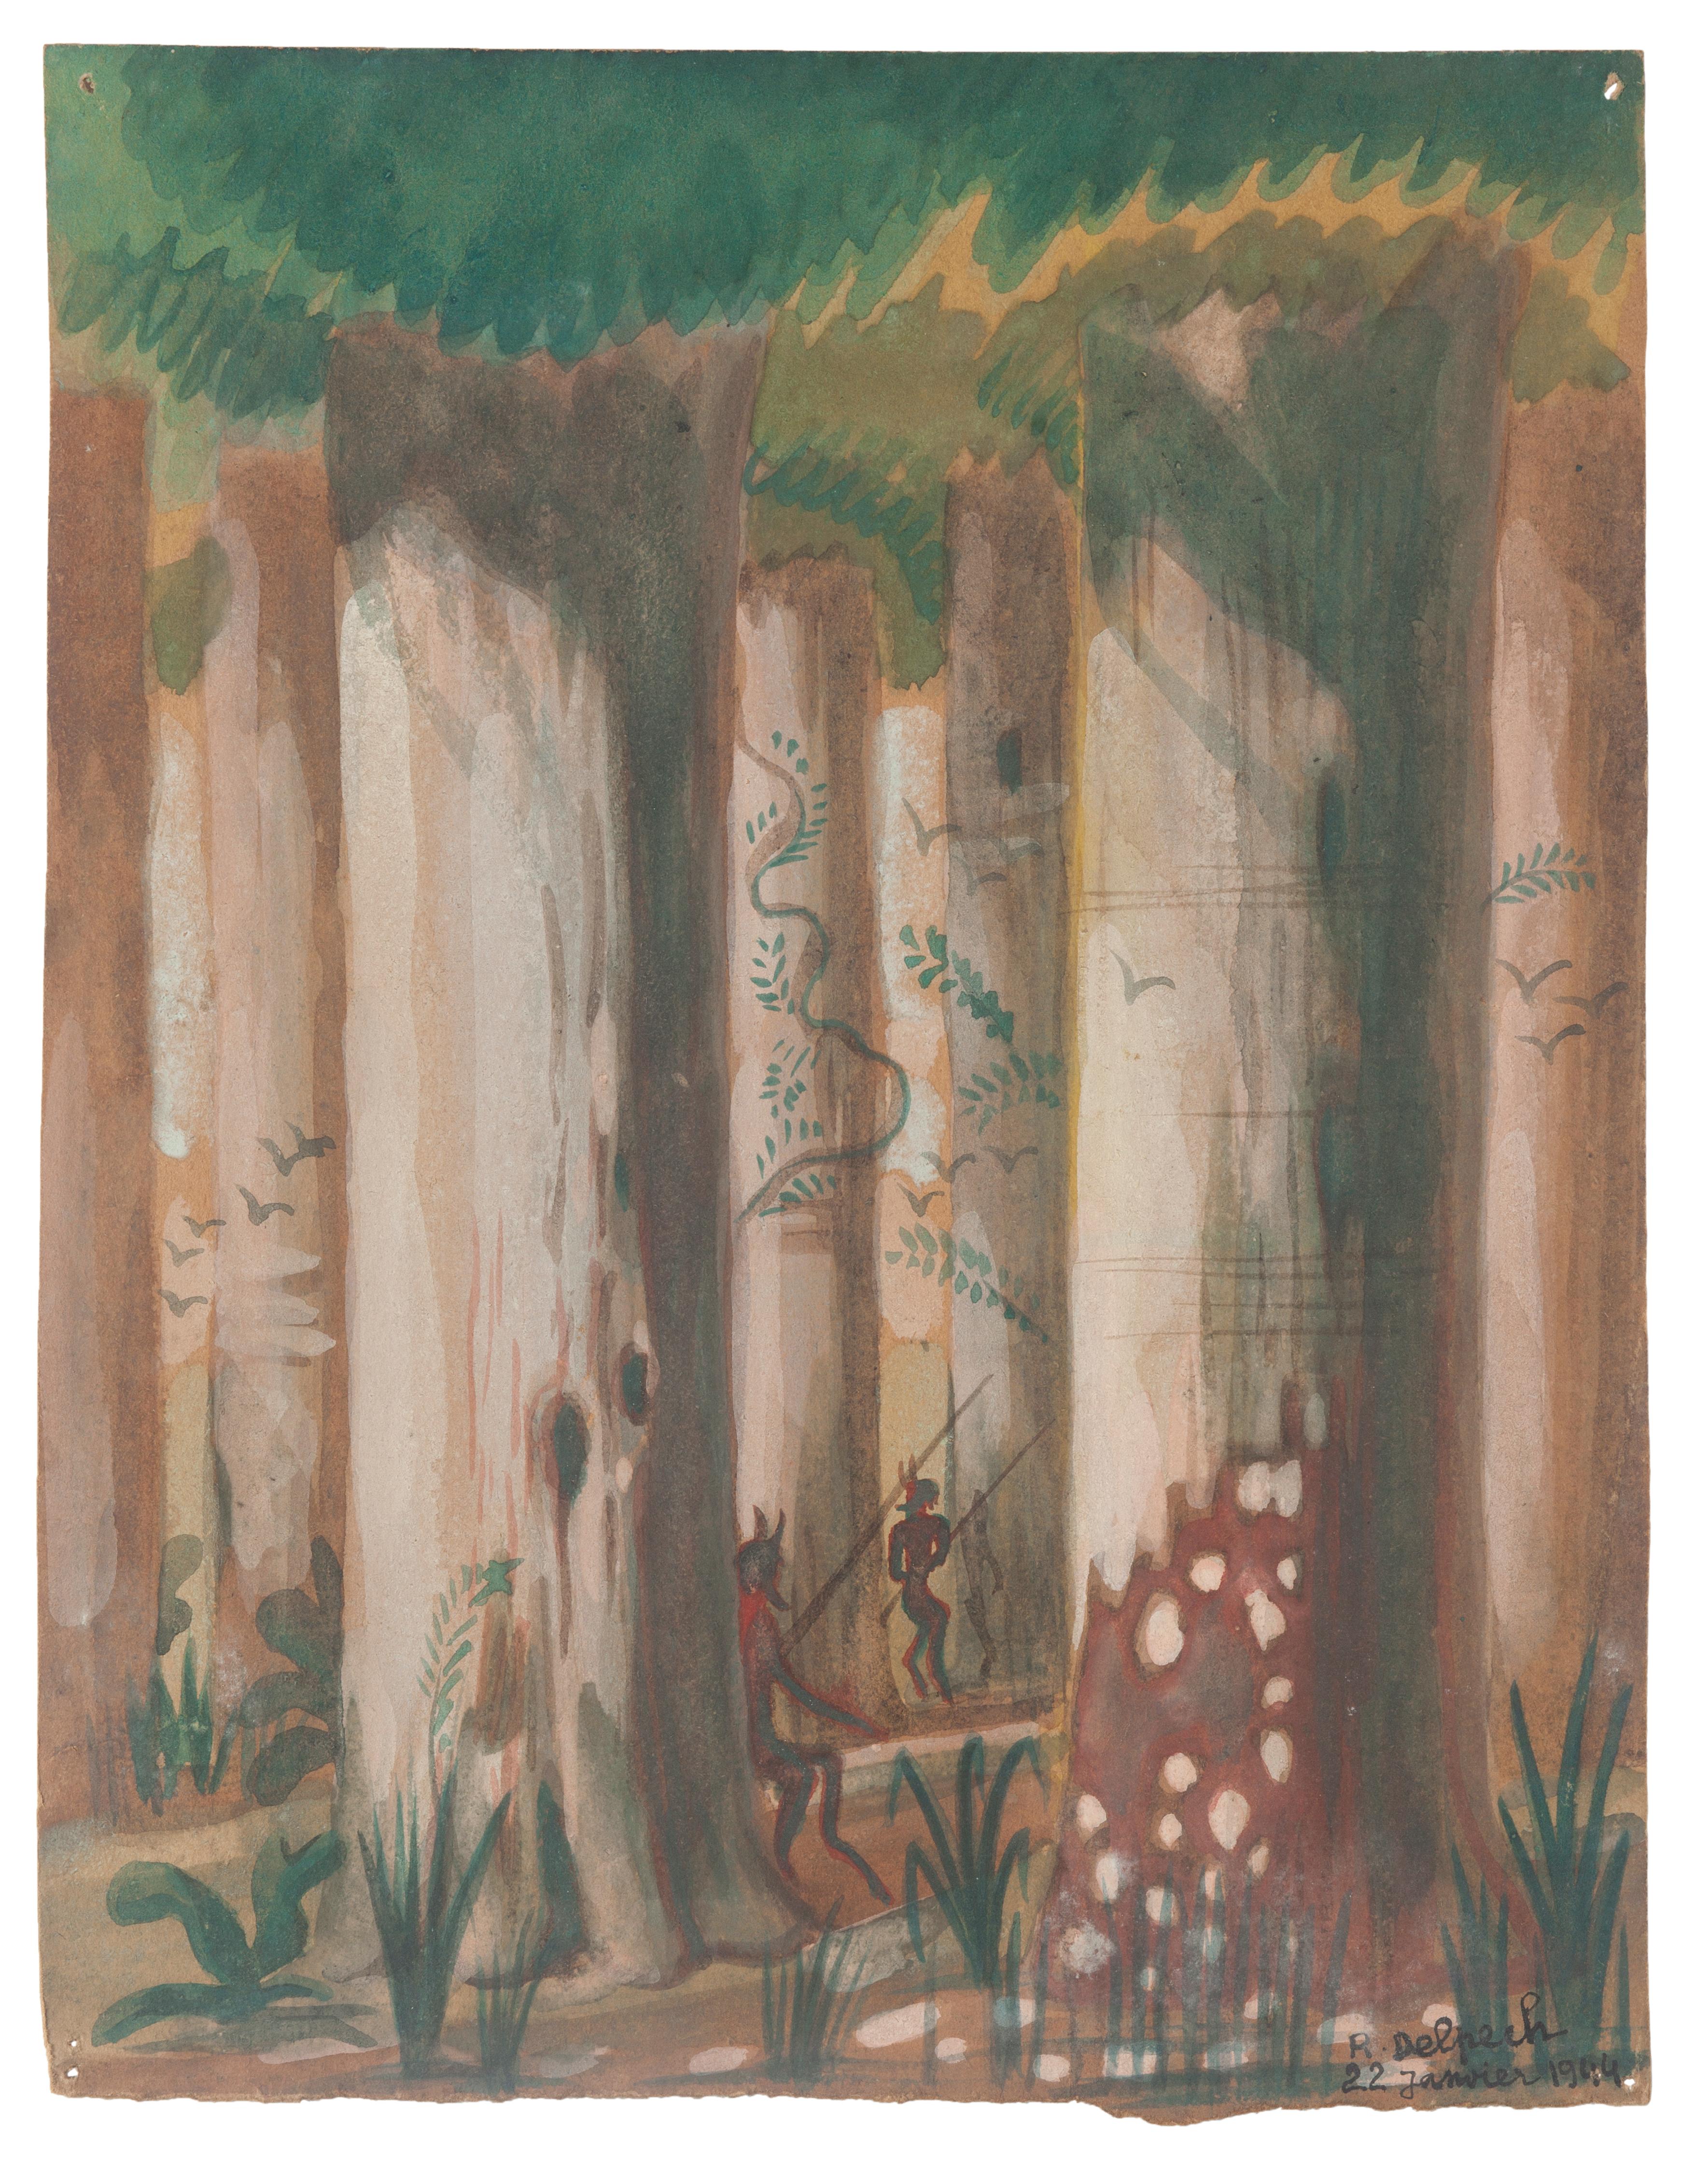 "Forest" 1942's is an original drawing in mixed media on paper, realized by Jean Delpech (1916-1988). 
The state of preservation of the artwork is very good.

Sheet dimension: 26.5 x 21 cm.

The artwork represents beautiful forest with vivid color,